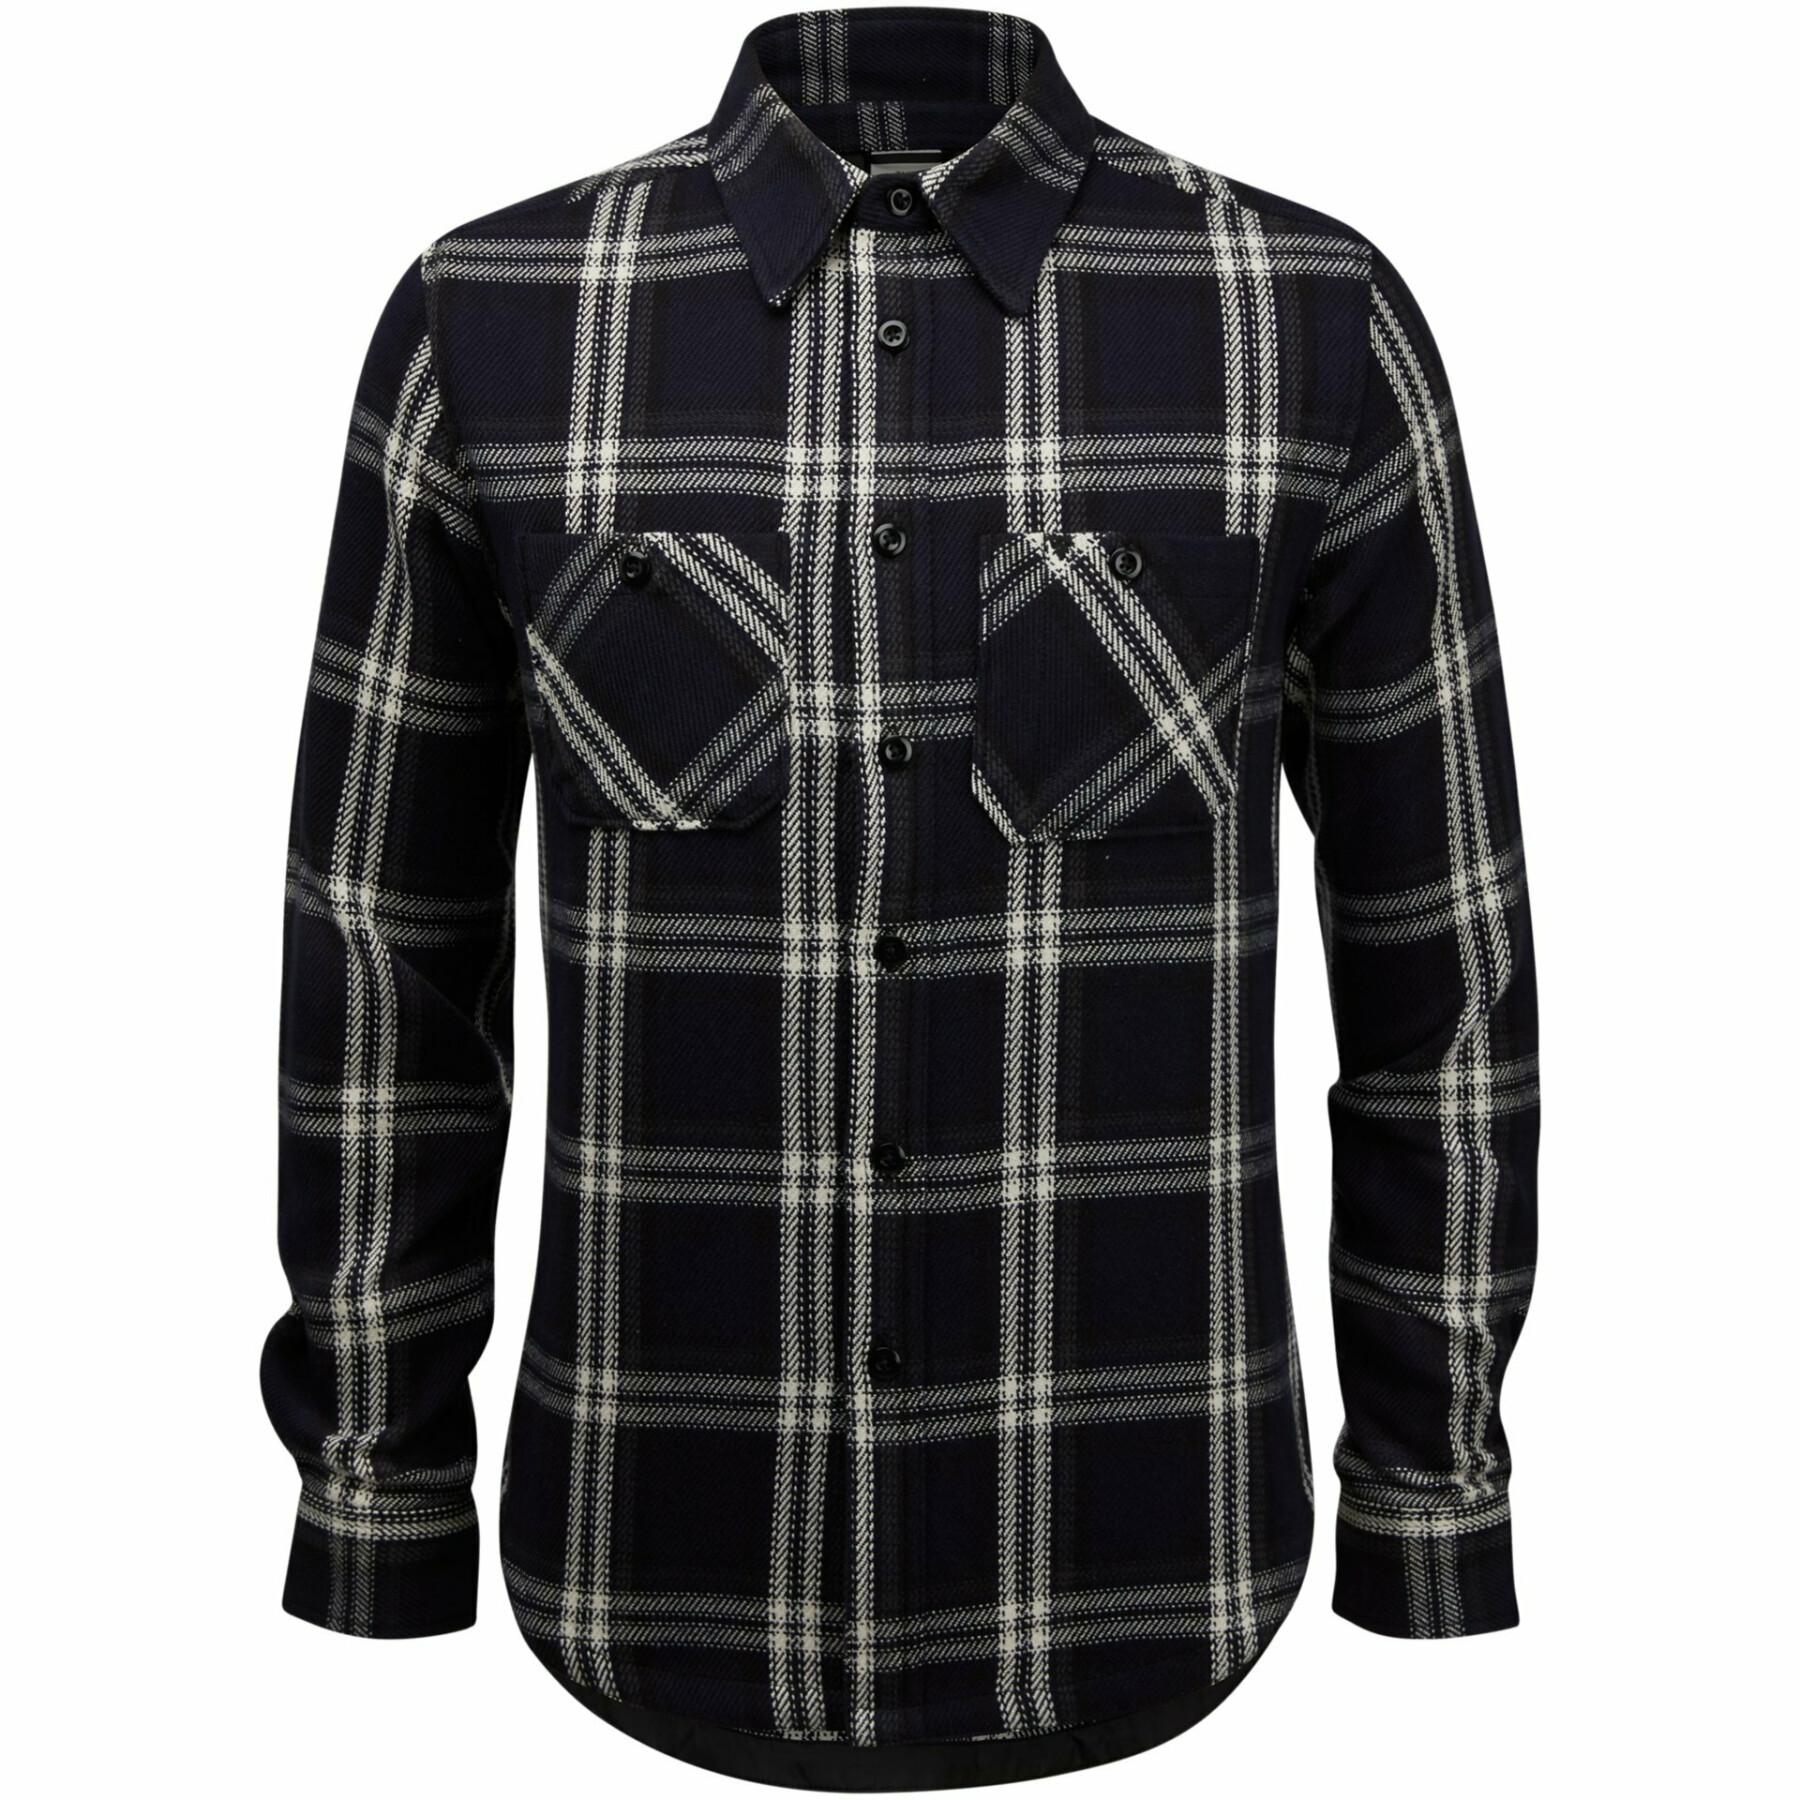 Hemd The North Face Valley Twill Flannel